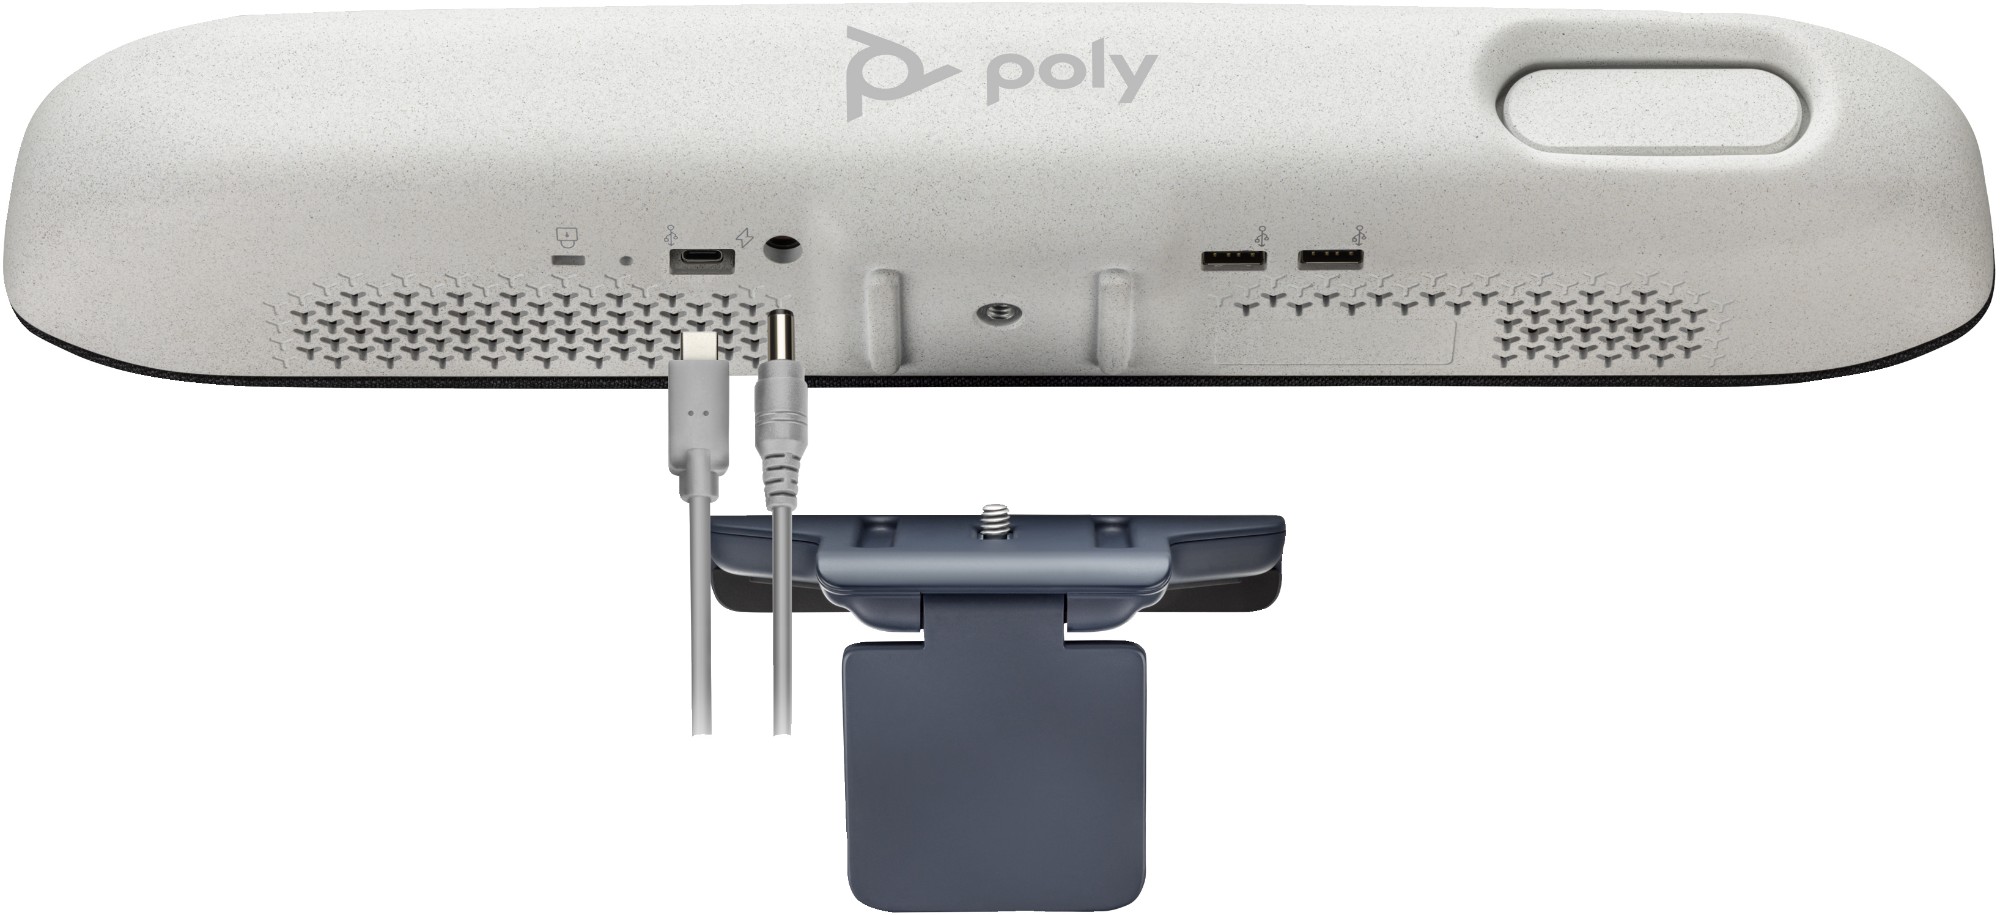 Photos - Other Video Equipment Poly Studio E70/P15/R30 Display Clamp 875K8AA 